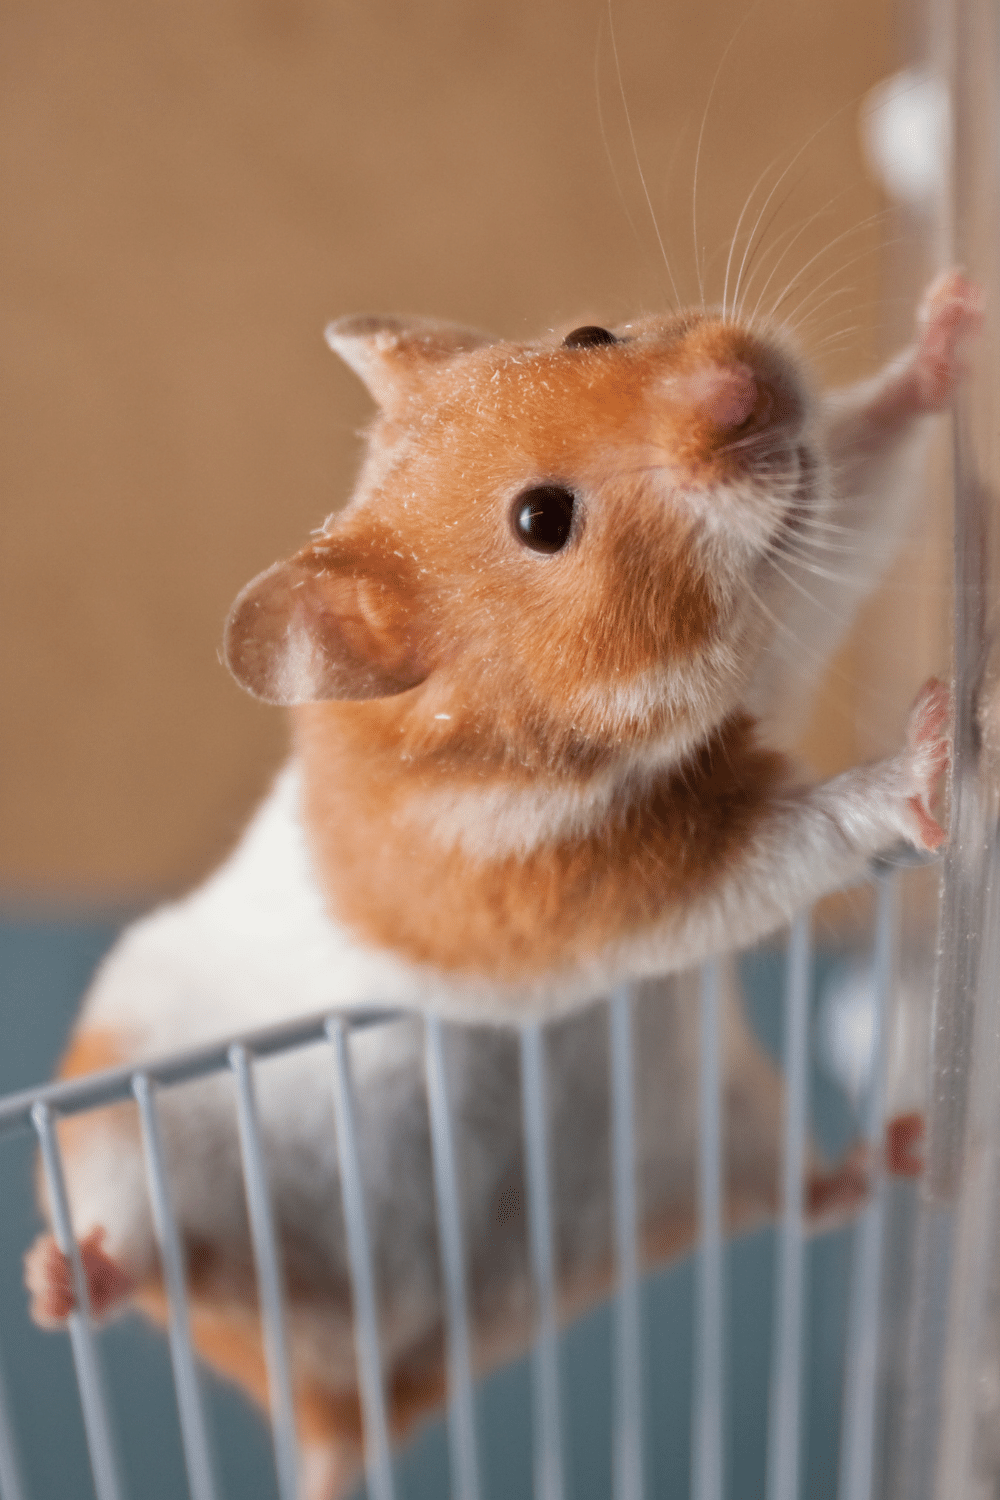 Extreme Clumsiness in Your Hamster